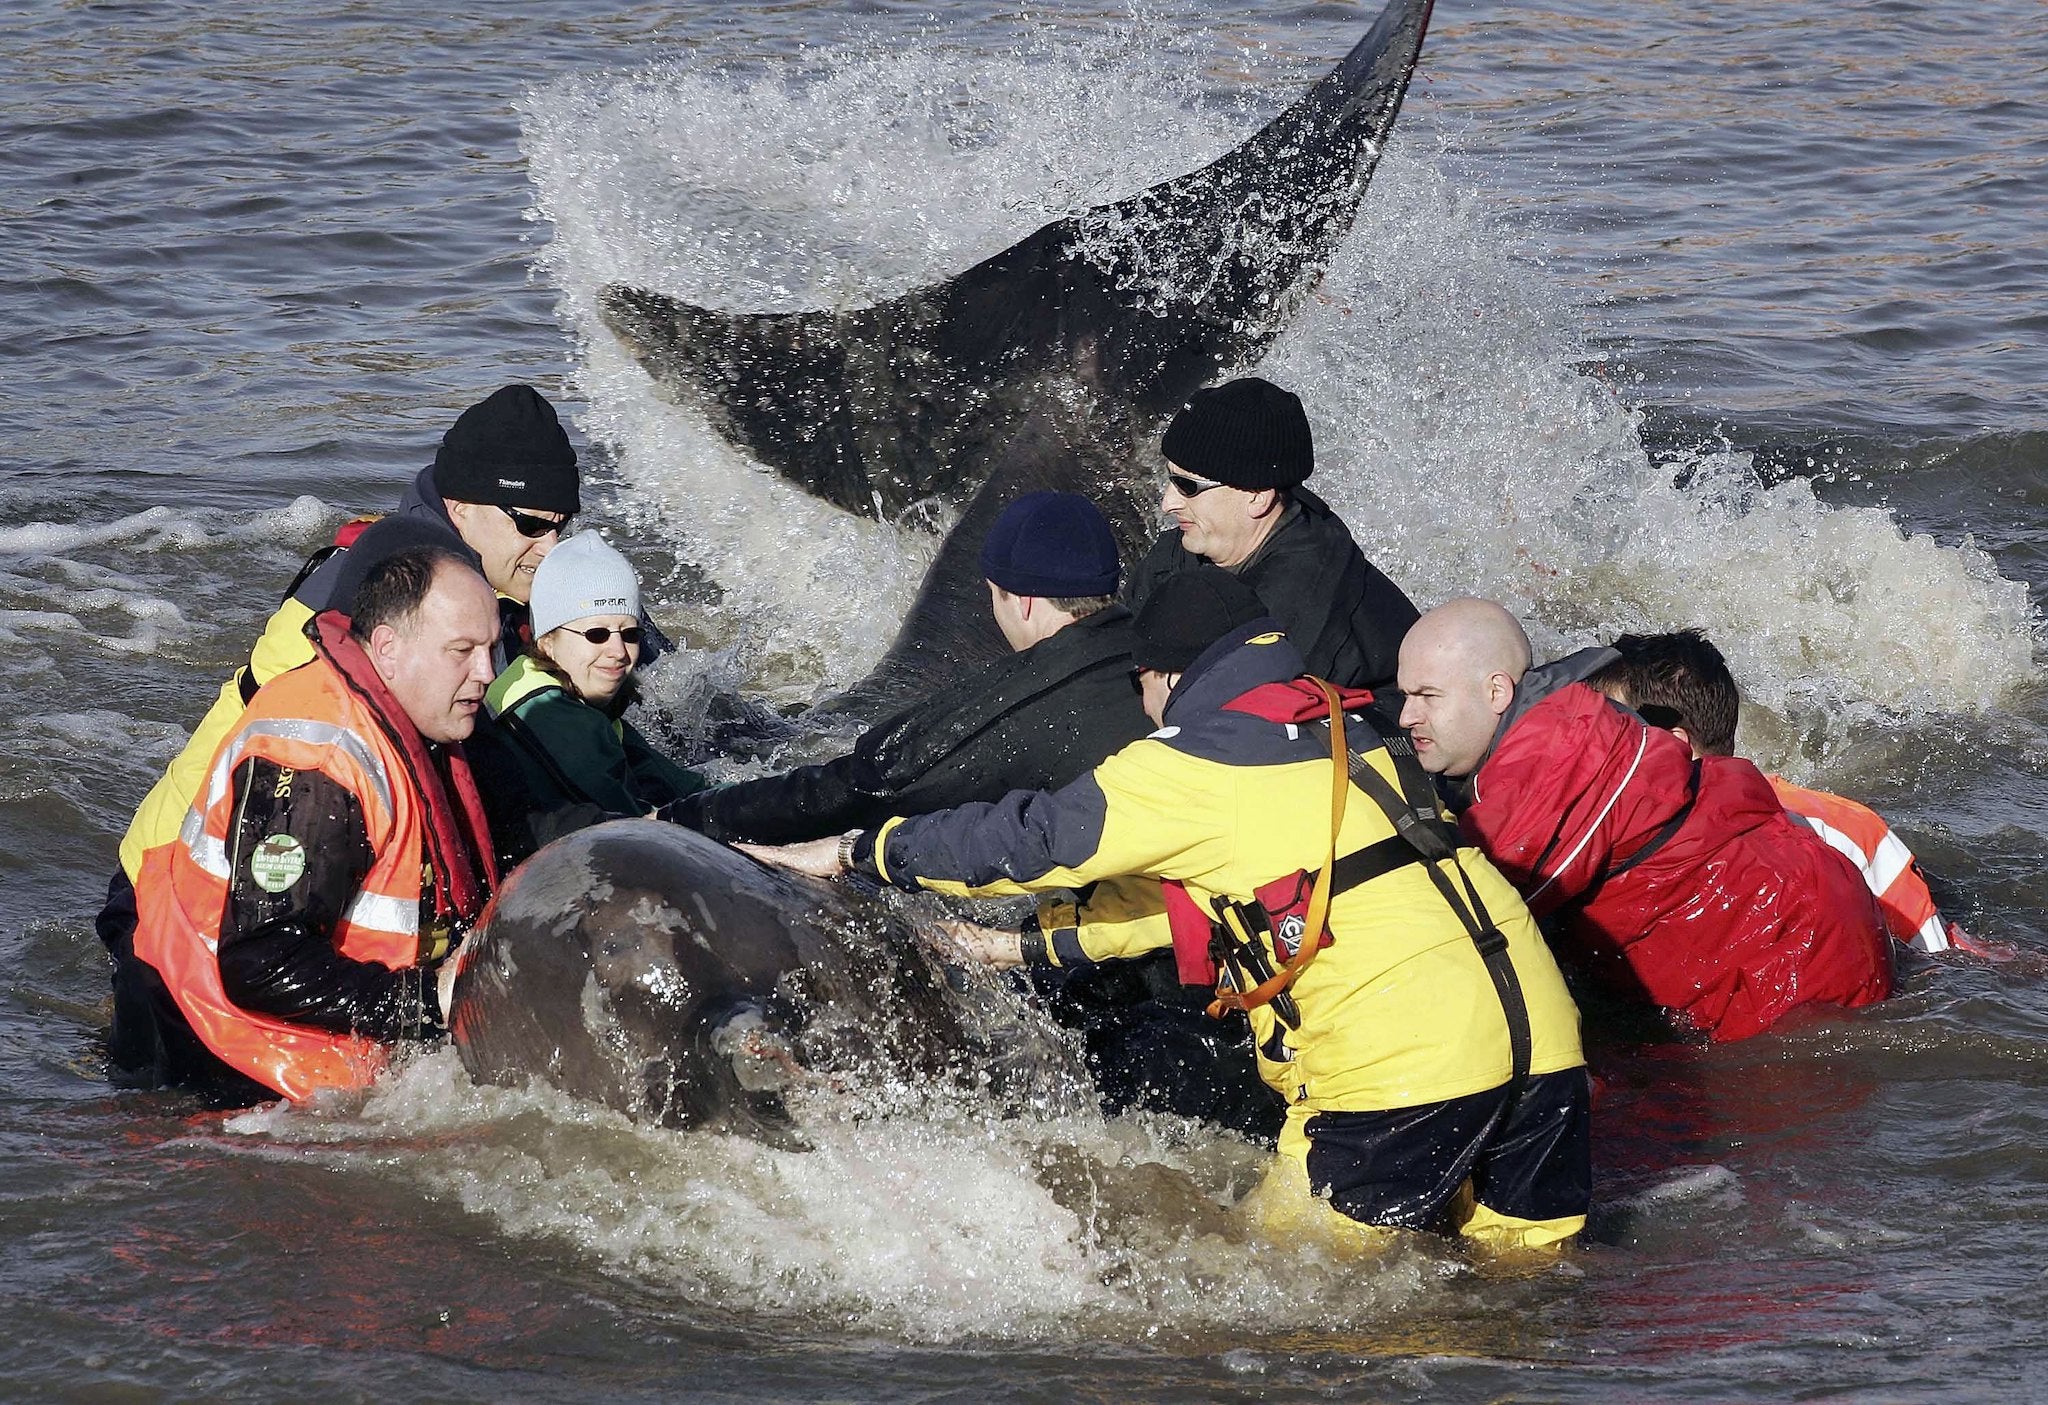 Rescuers manoeuvre a northern bottle-nosed whale as it spends its second day in the Thames in January 2006 (Peter Macdiarmid/Getty)